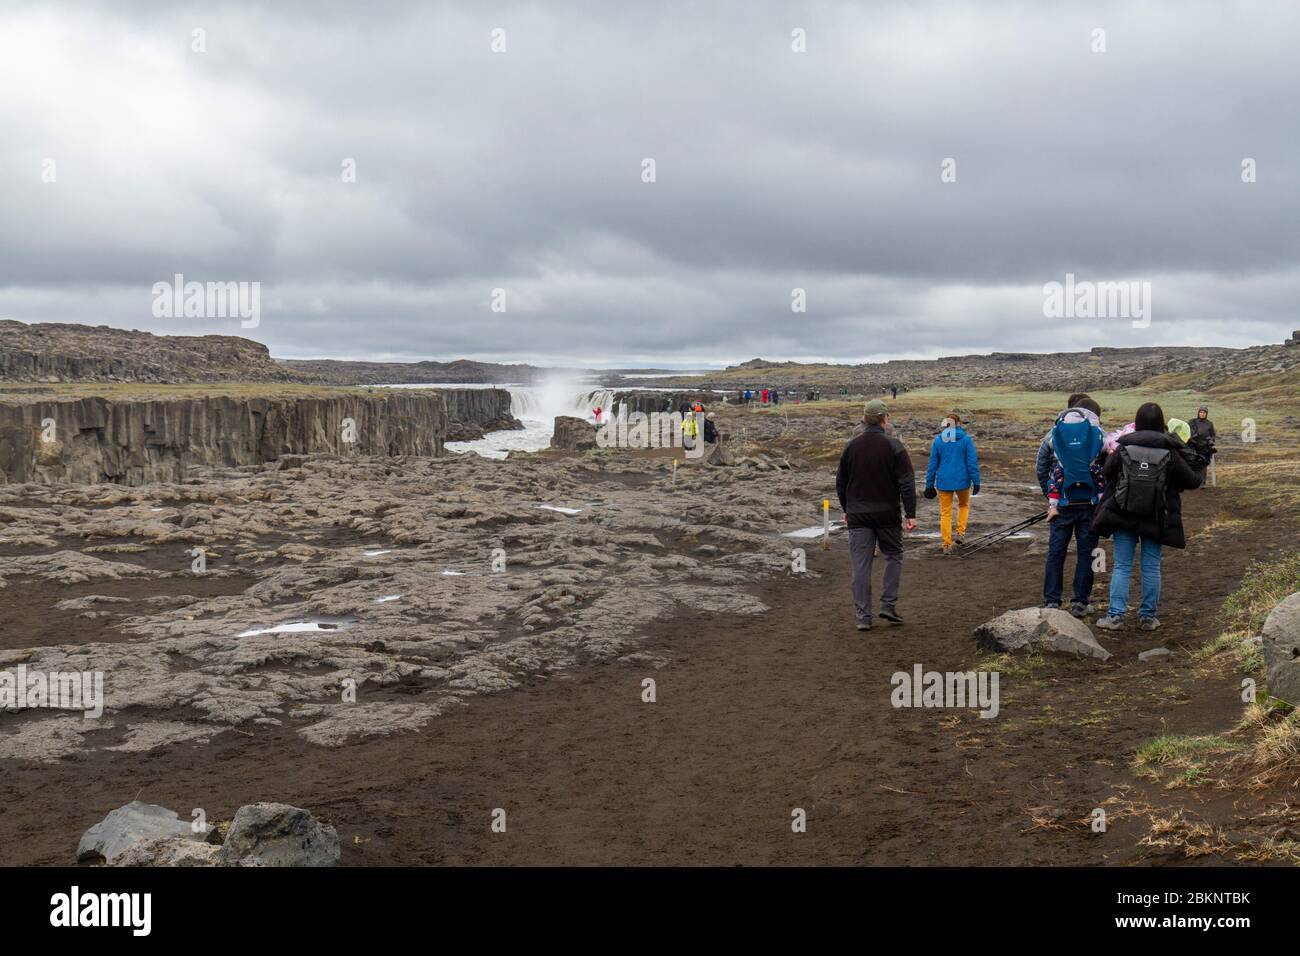 Visitors walking towards the Selfoss waterfall in the Jökulsárgljúfur canyon upriver from the more famous Dettifoss waterfall, northern Iceland. Stock Photo